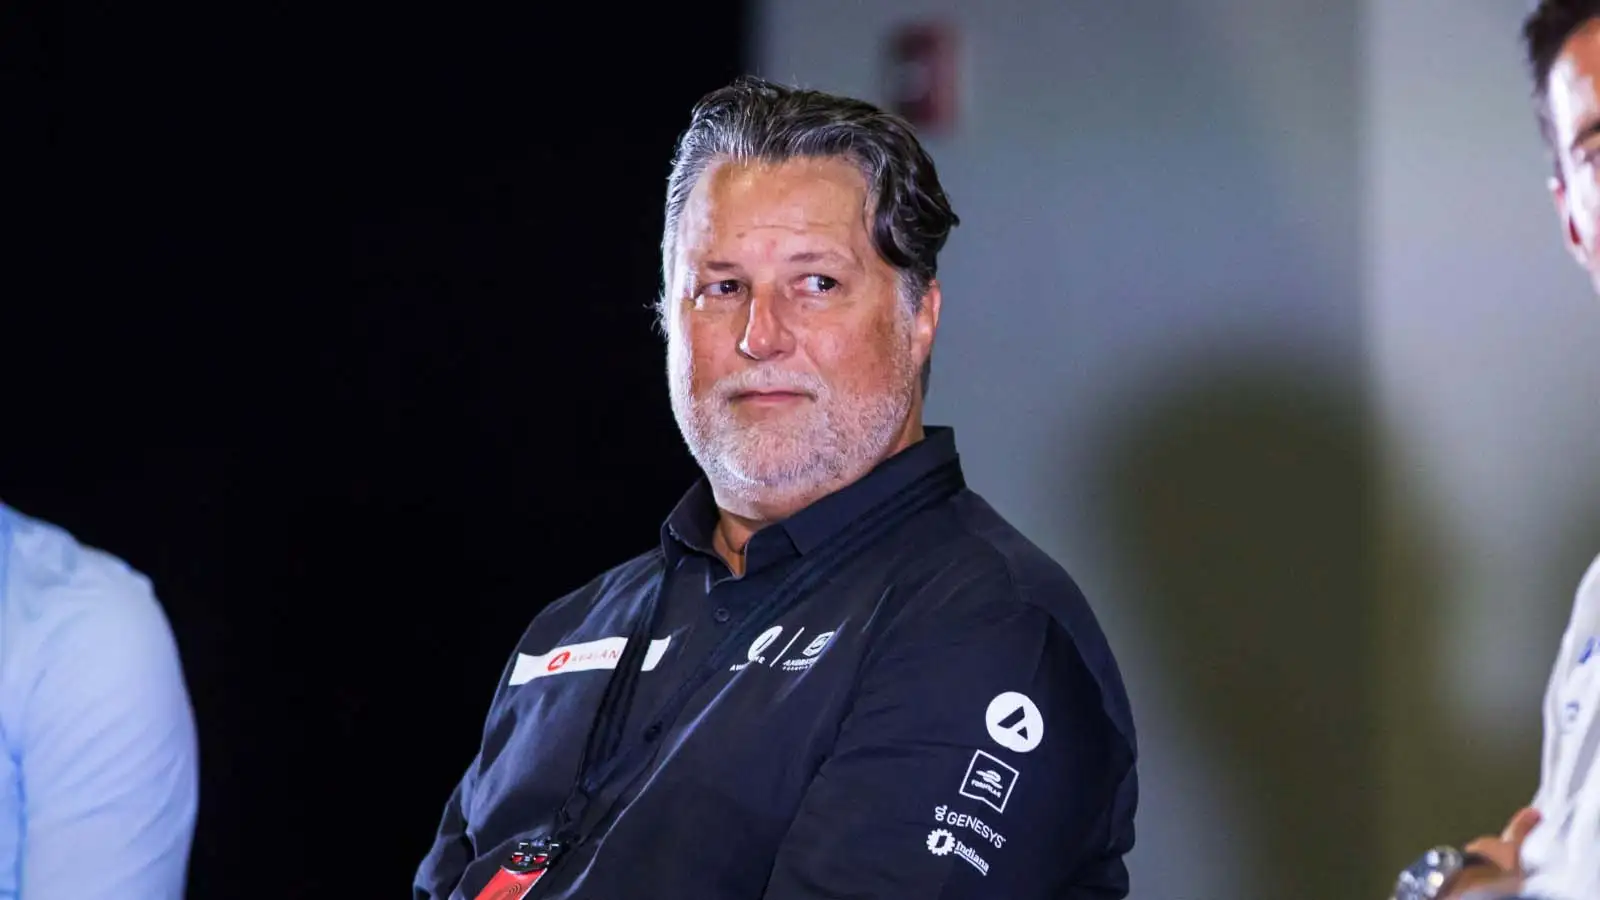 Michael Andretti at a press conference. New York July 2022.